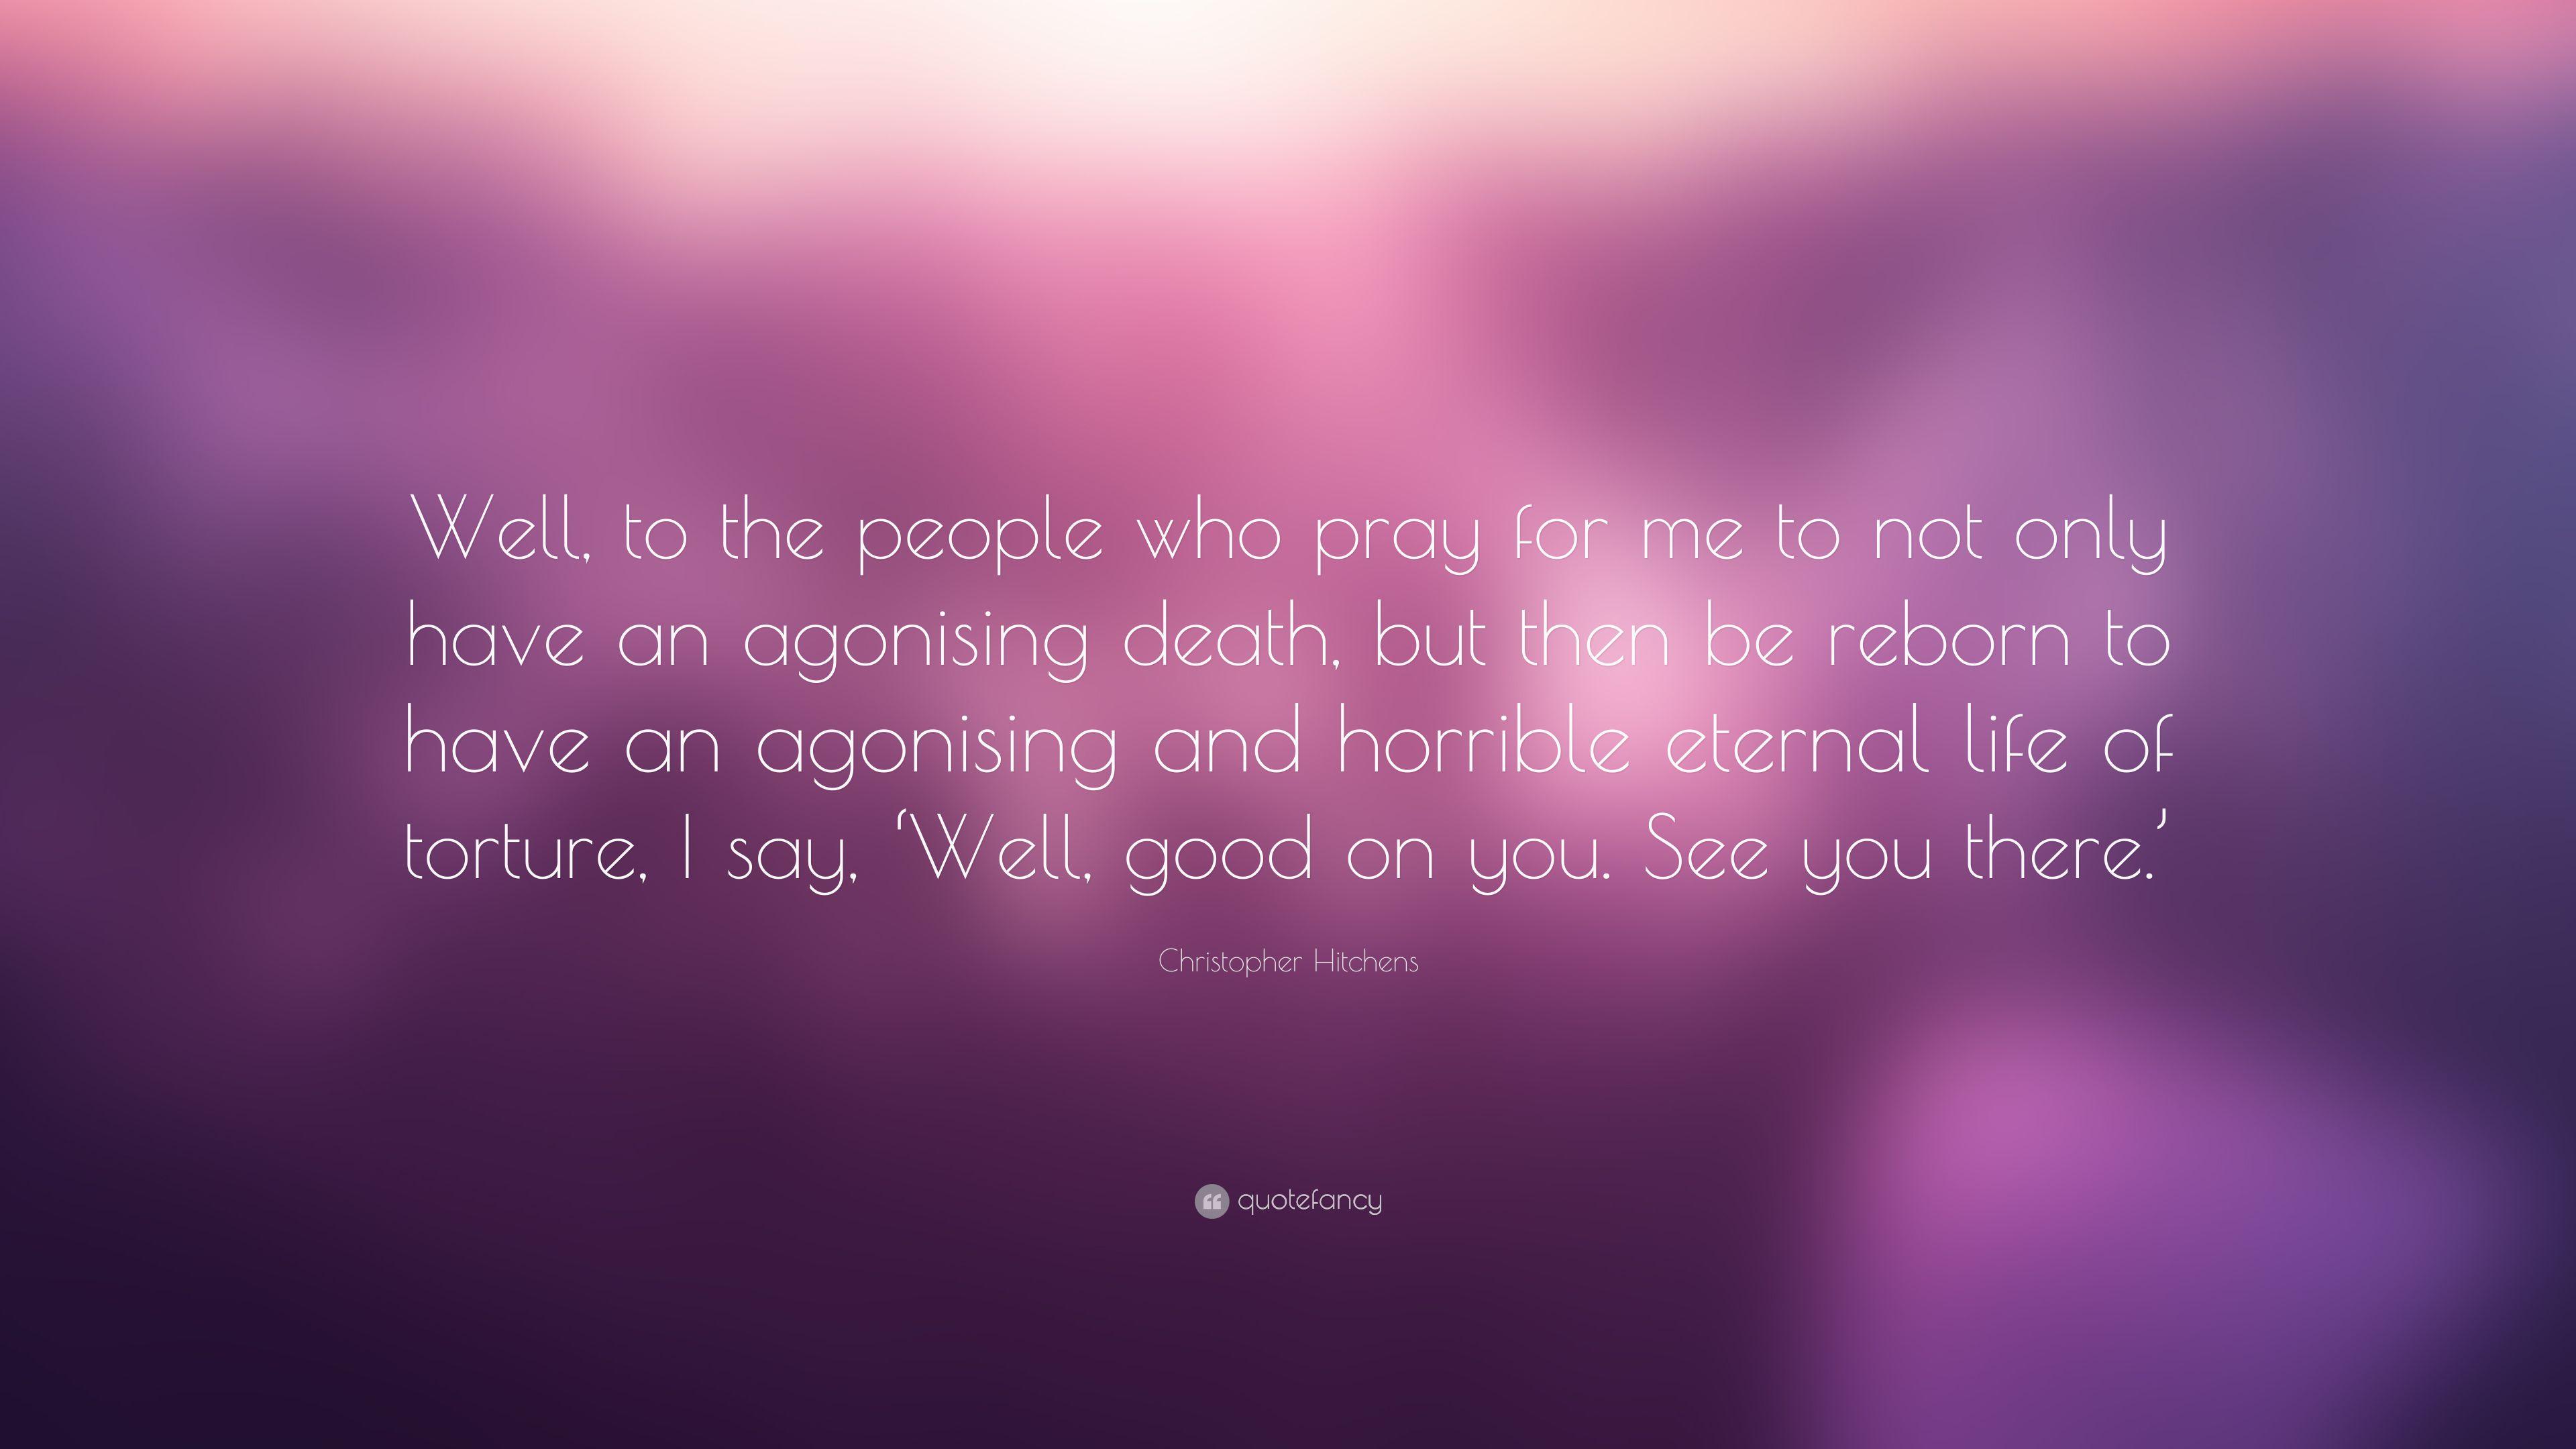 Christopher Hitchens Quote: “Well, to the people who pray for me